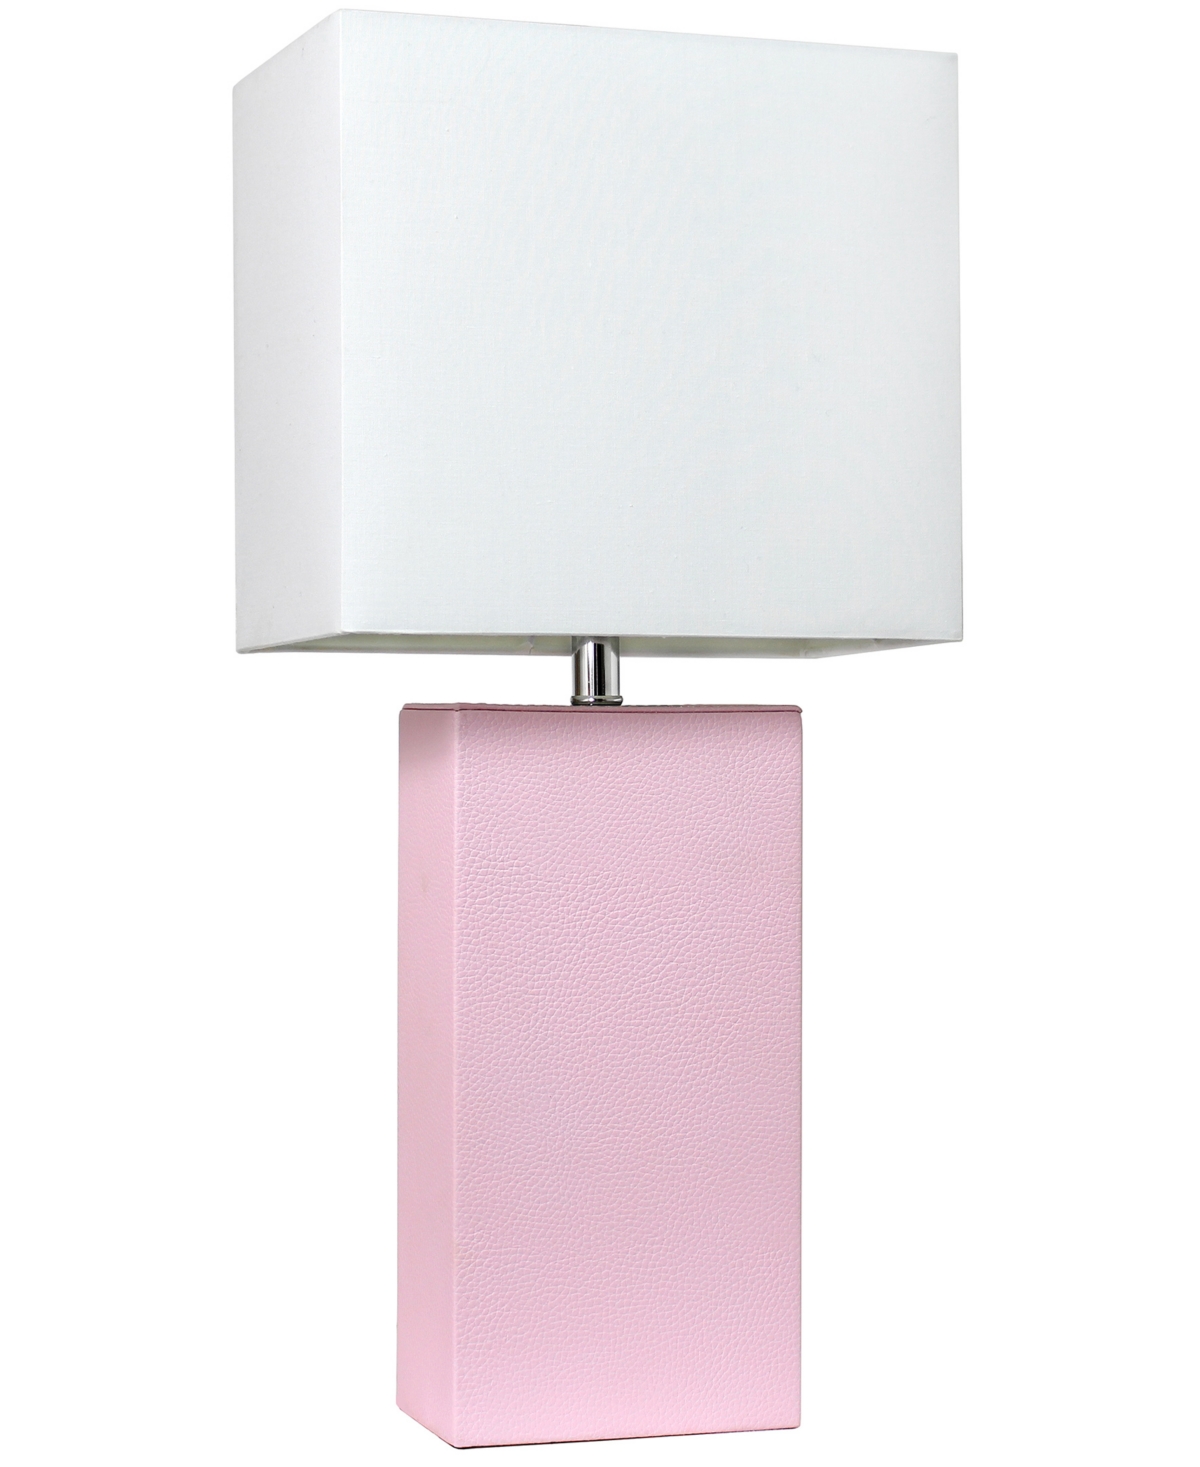 All The Rages Lalia Home Lexington 21" Leather Base Modern Home Decor Bedside Table Lamp With White Rectangular Fa In Blush Pink